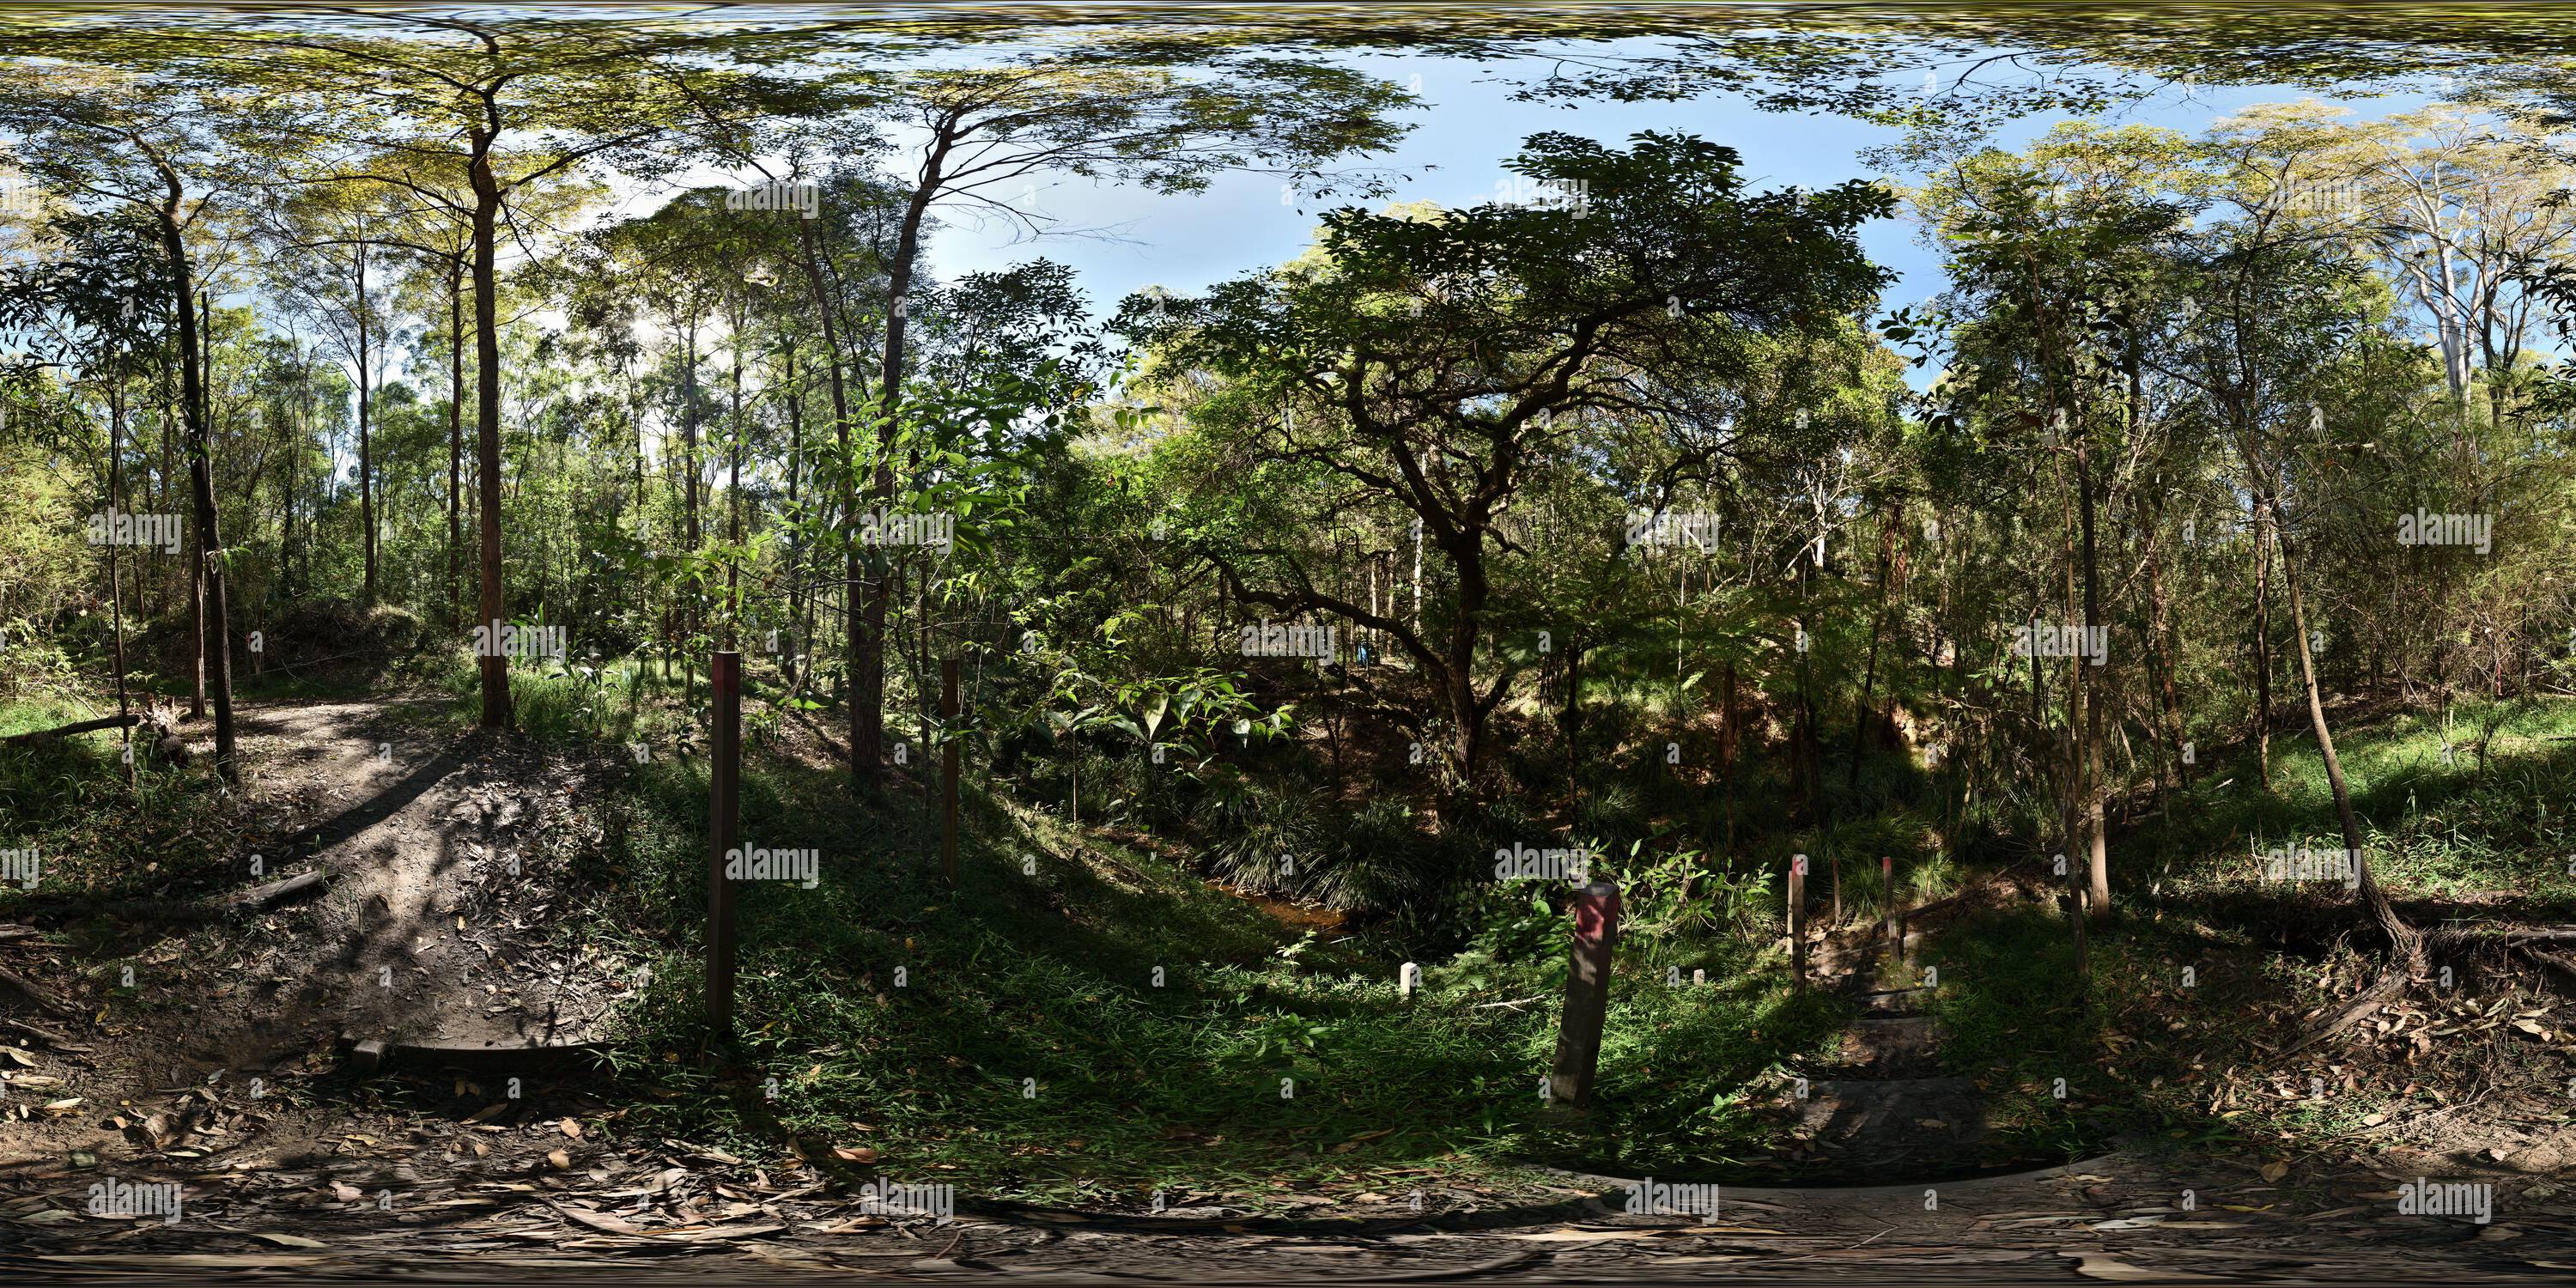 360 degree panoramic view of Lush vegetation, planting stakes and steps, grasses and tree ferns on the banks of Perrin Creek, Bushland Rehabilitation, Seven Hills, Brisbane